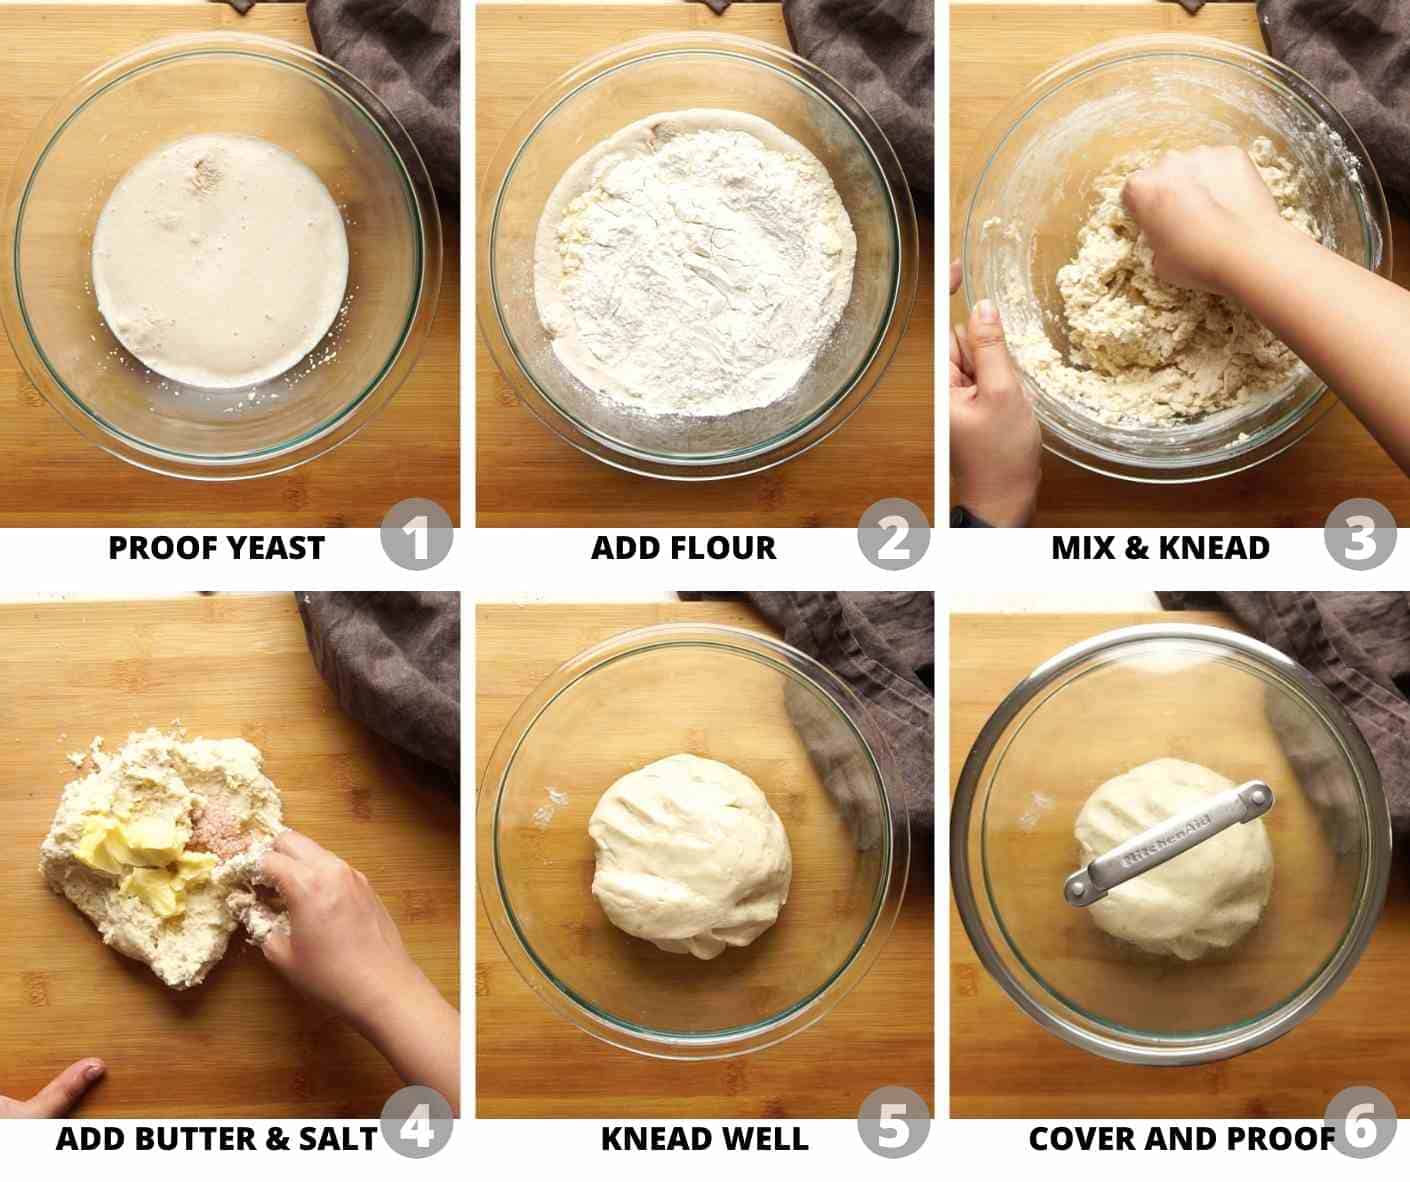 Step by step pictures showing how to make the dough